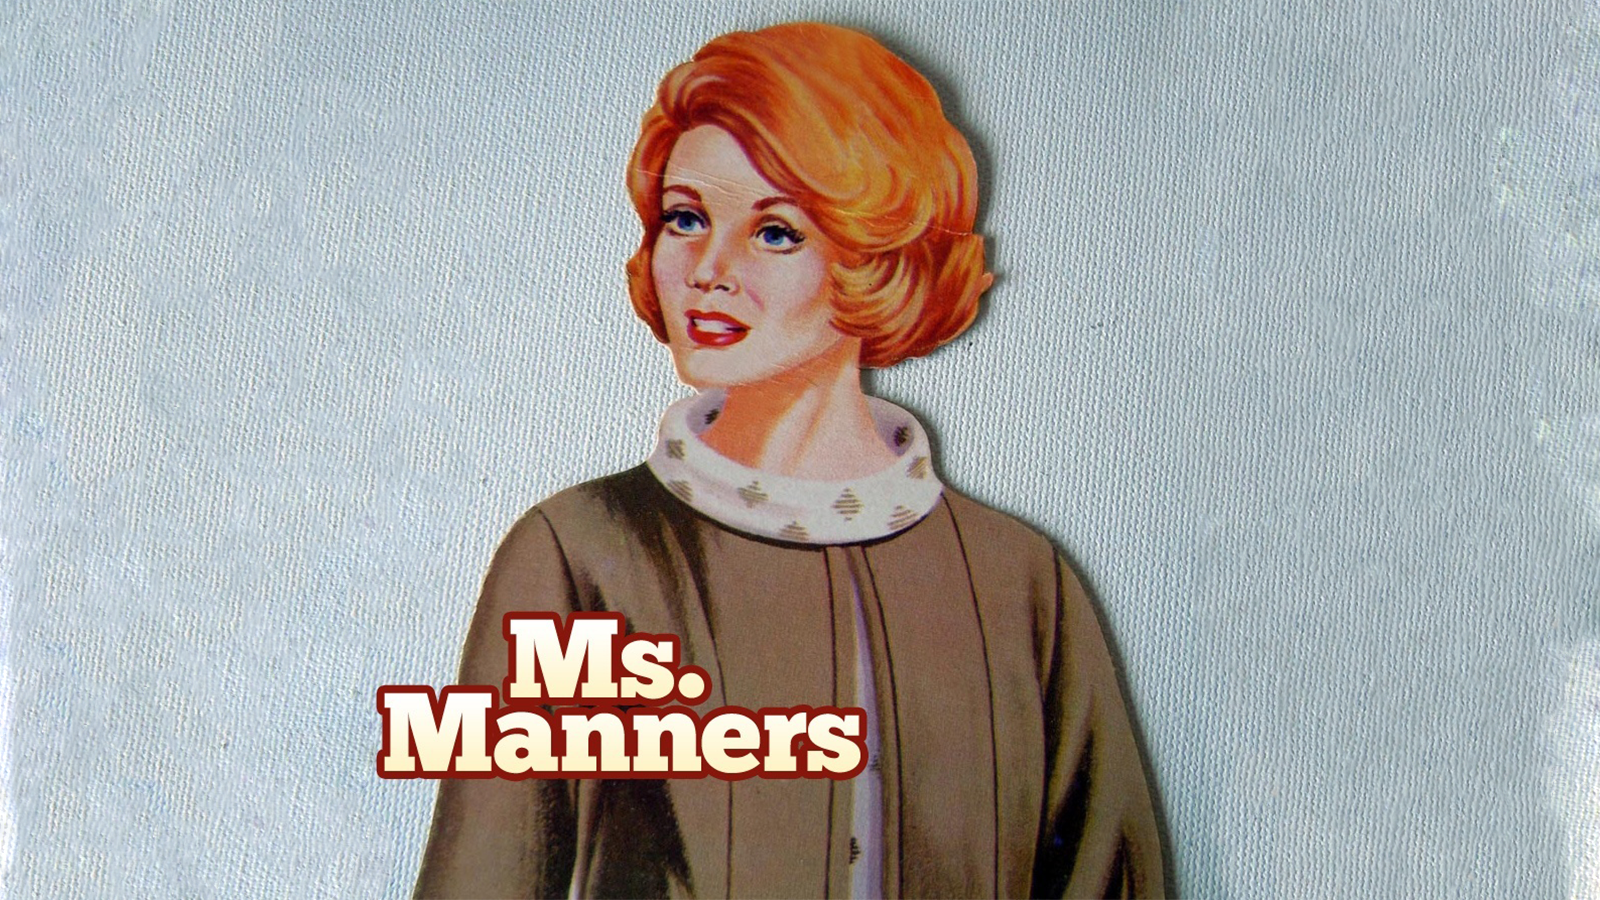 old magazine illustration of Ms. Manners